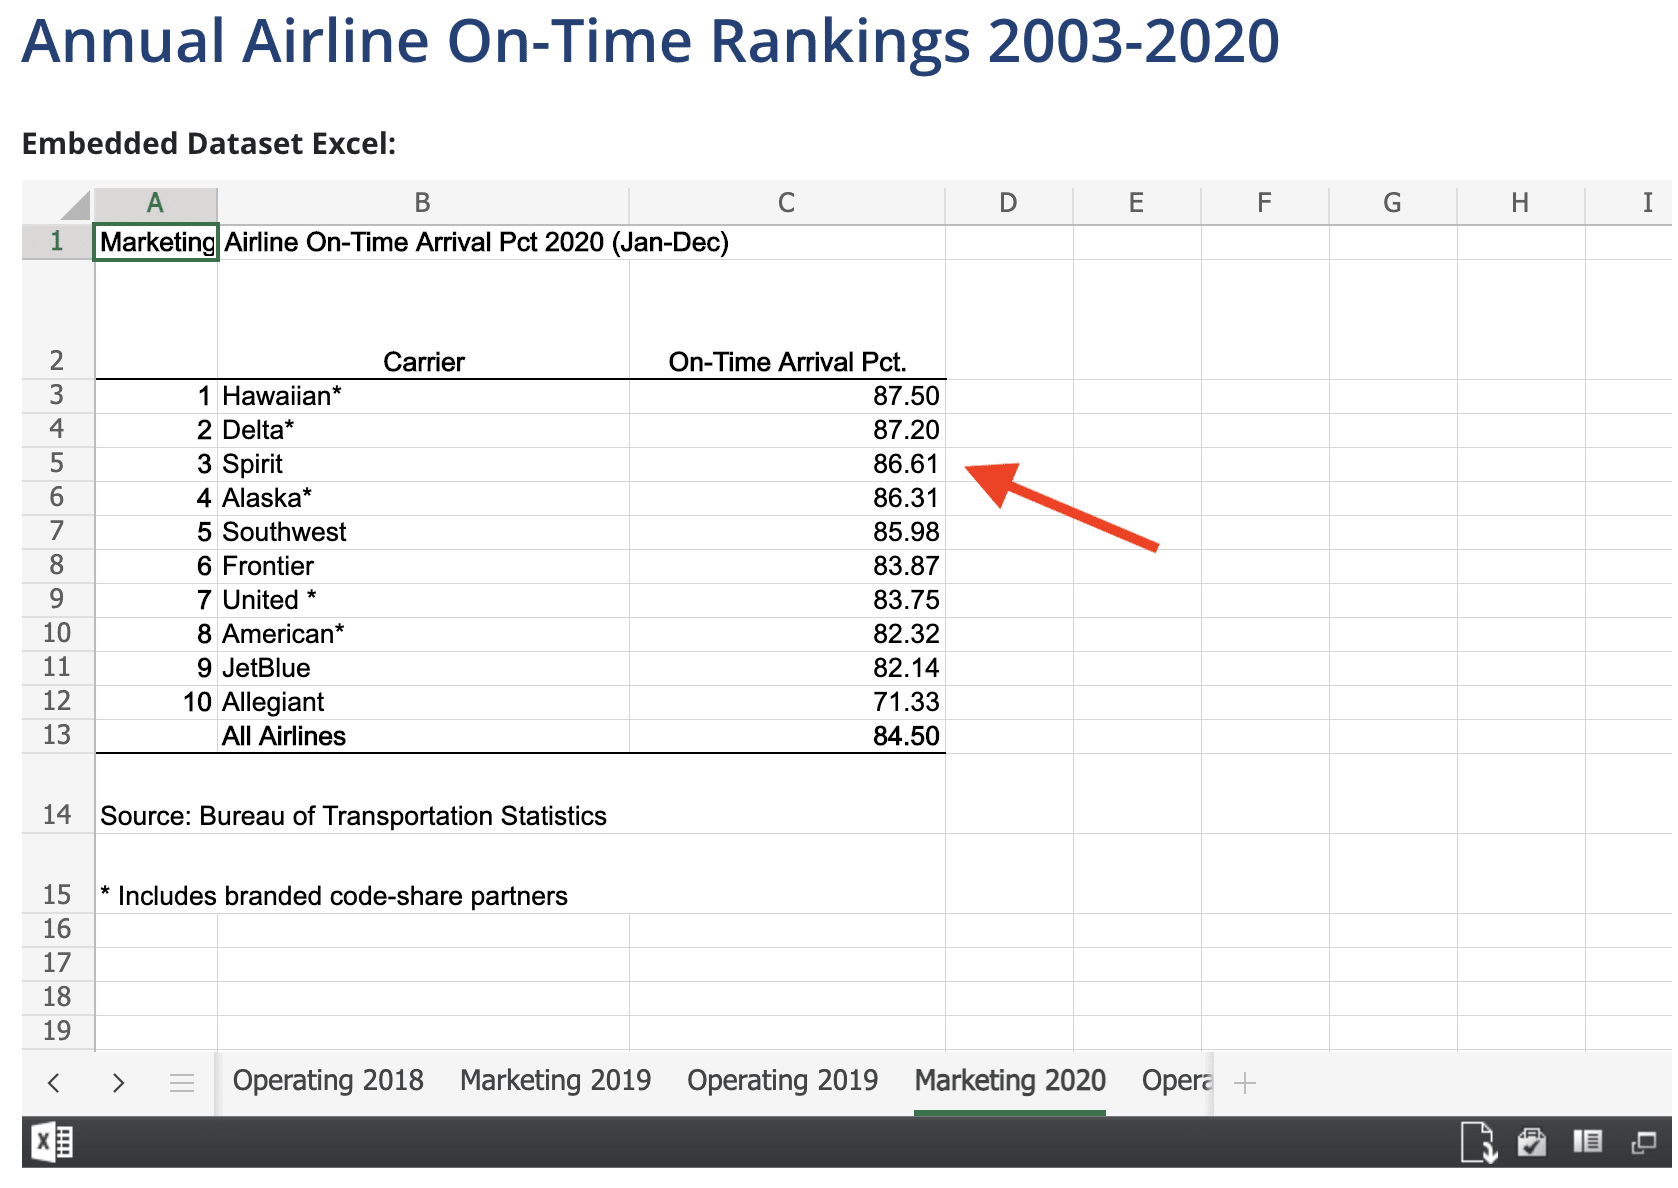 Airline on-time rankings for 2020